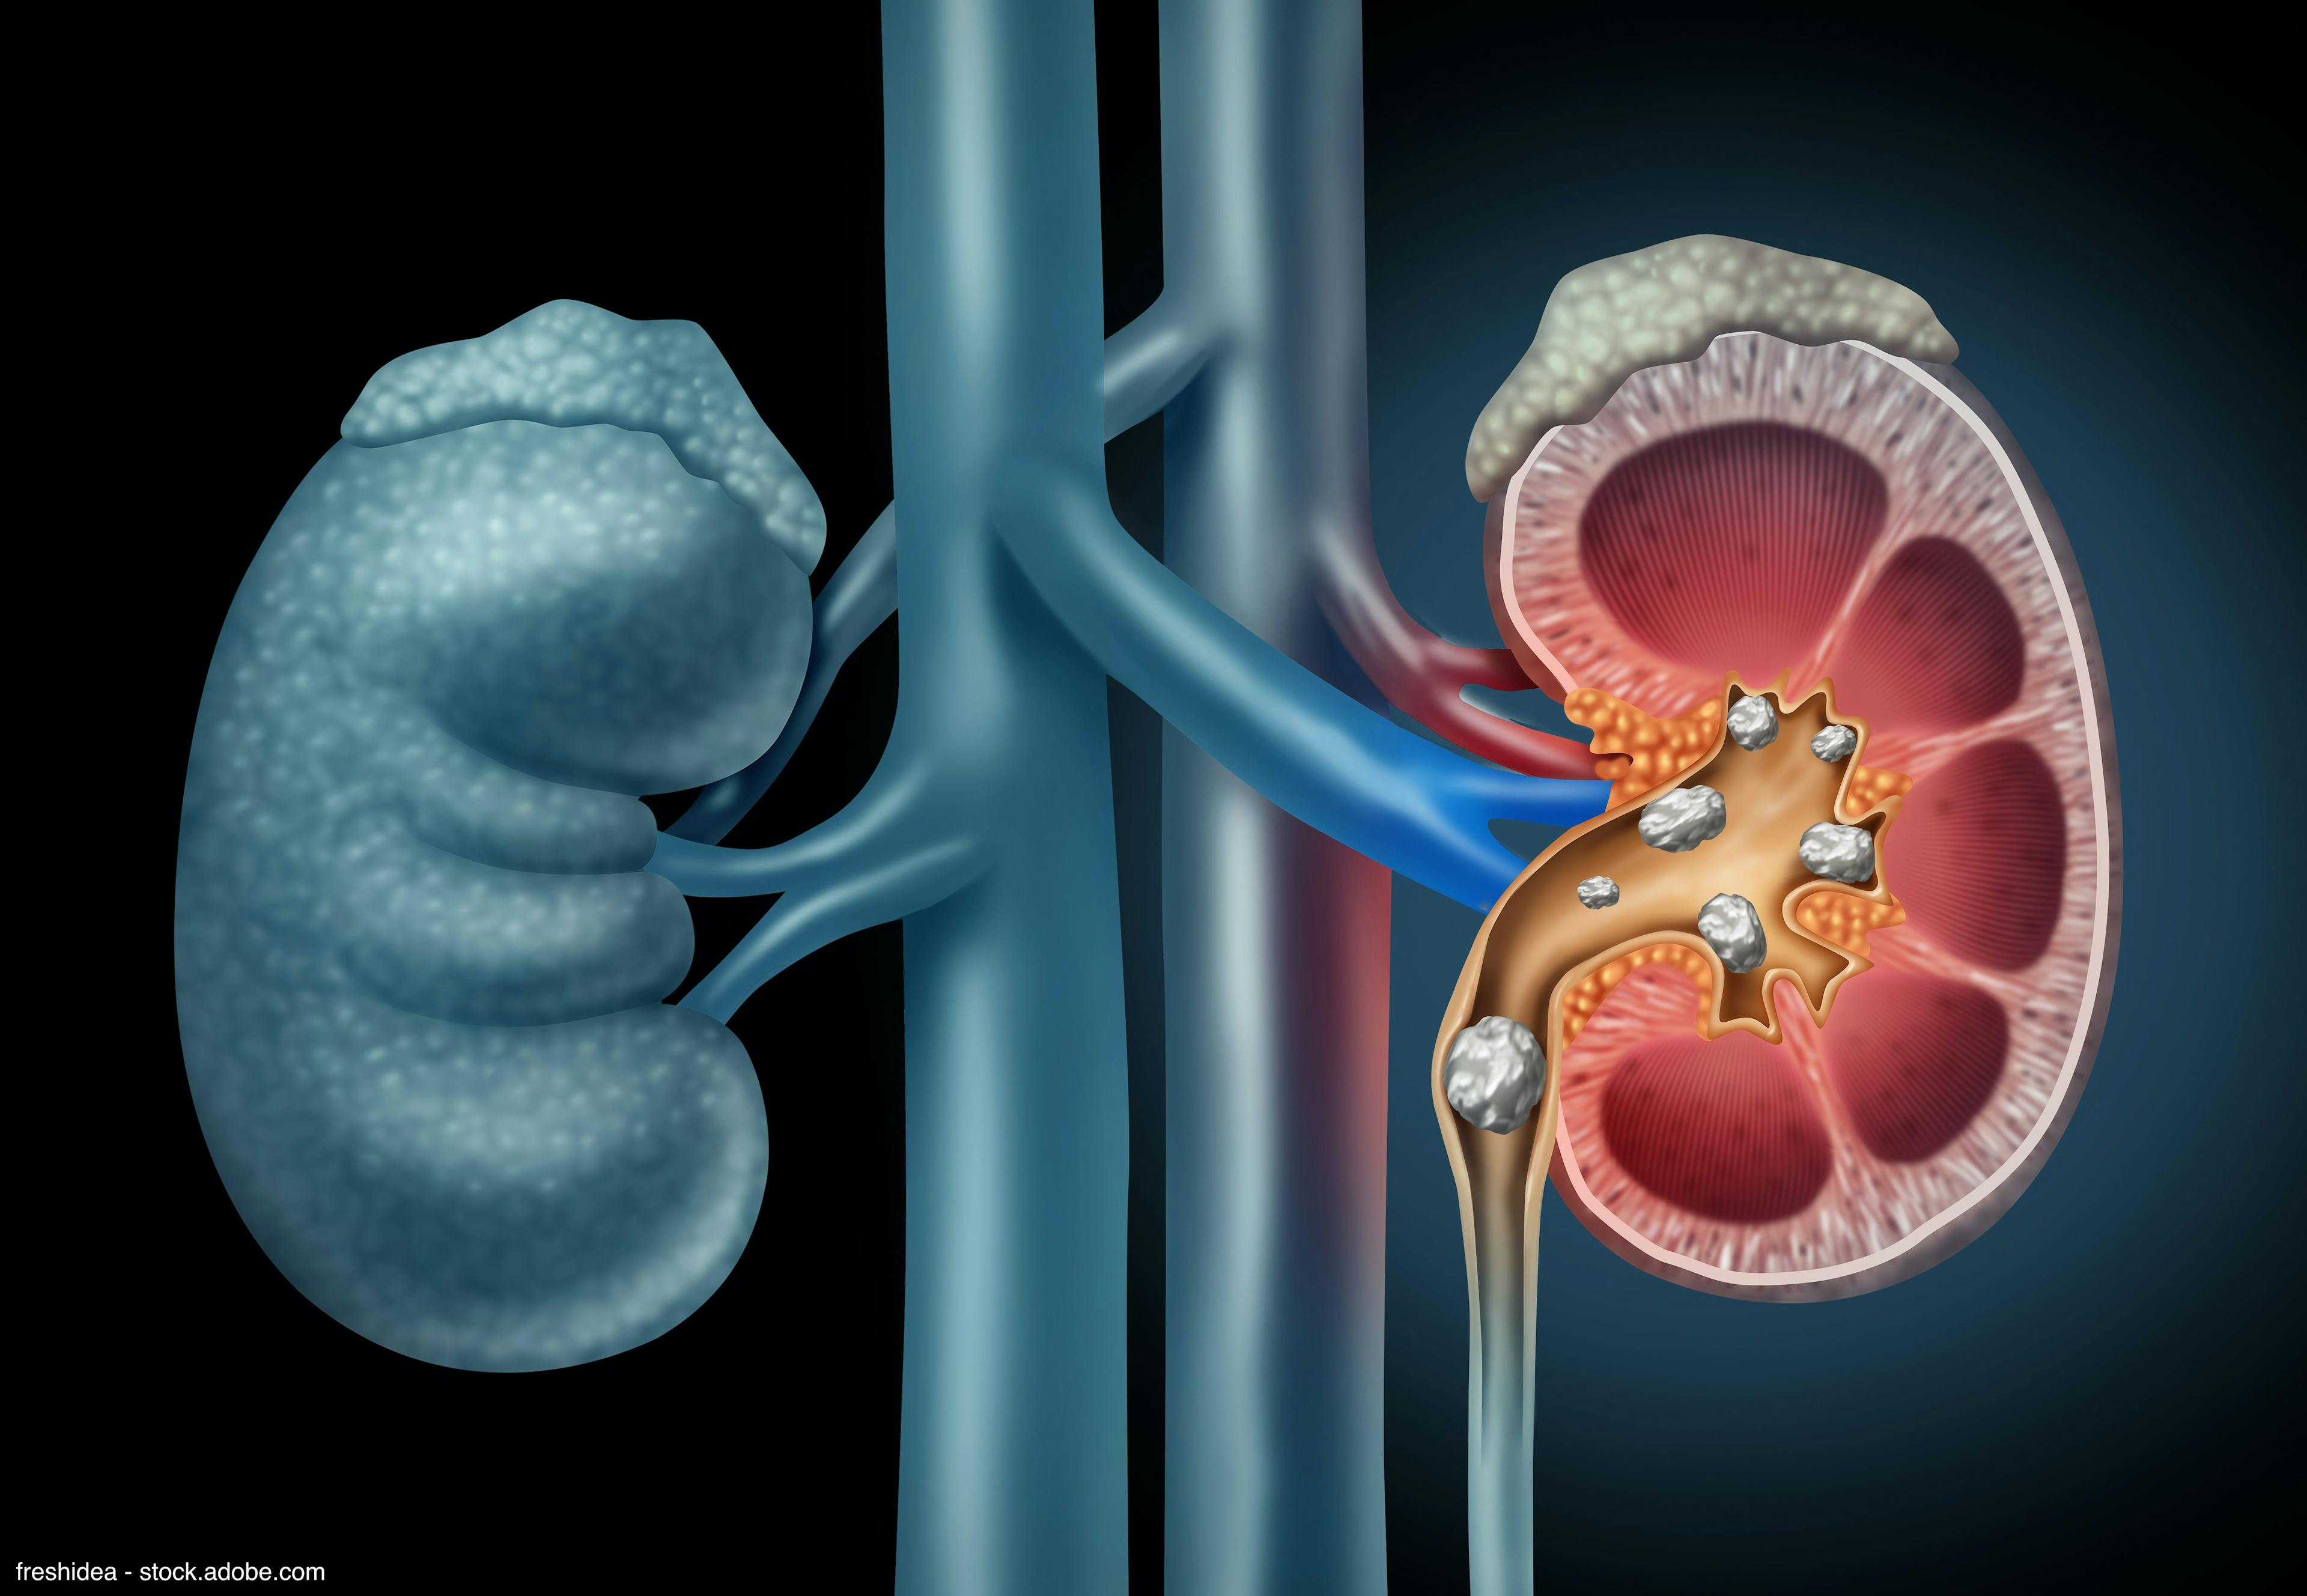 Illustration of kidney cross section with stones